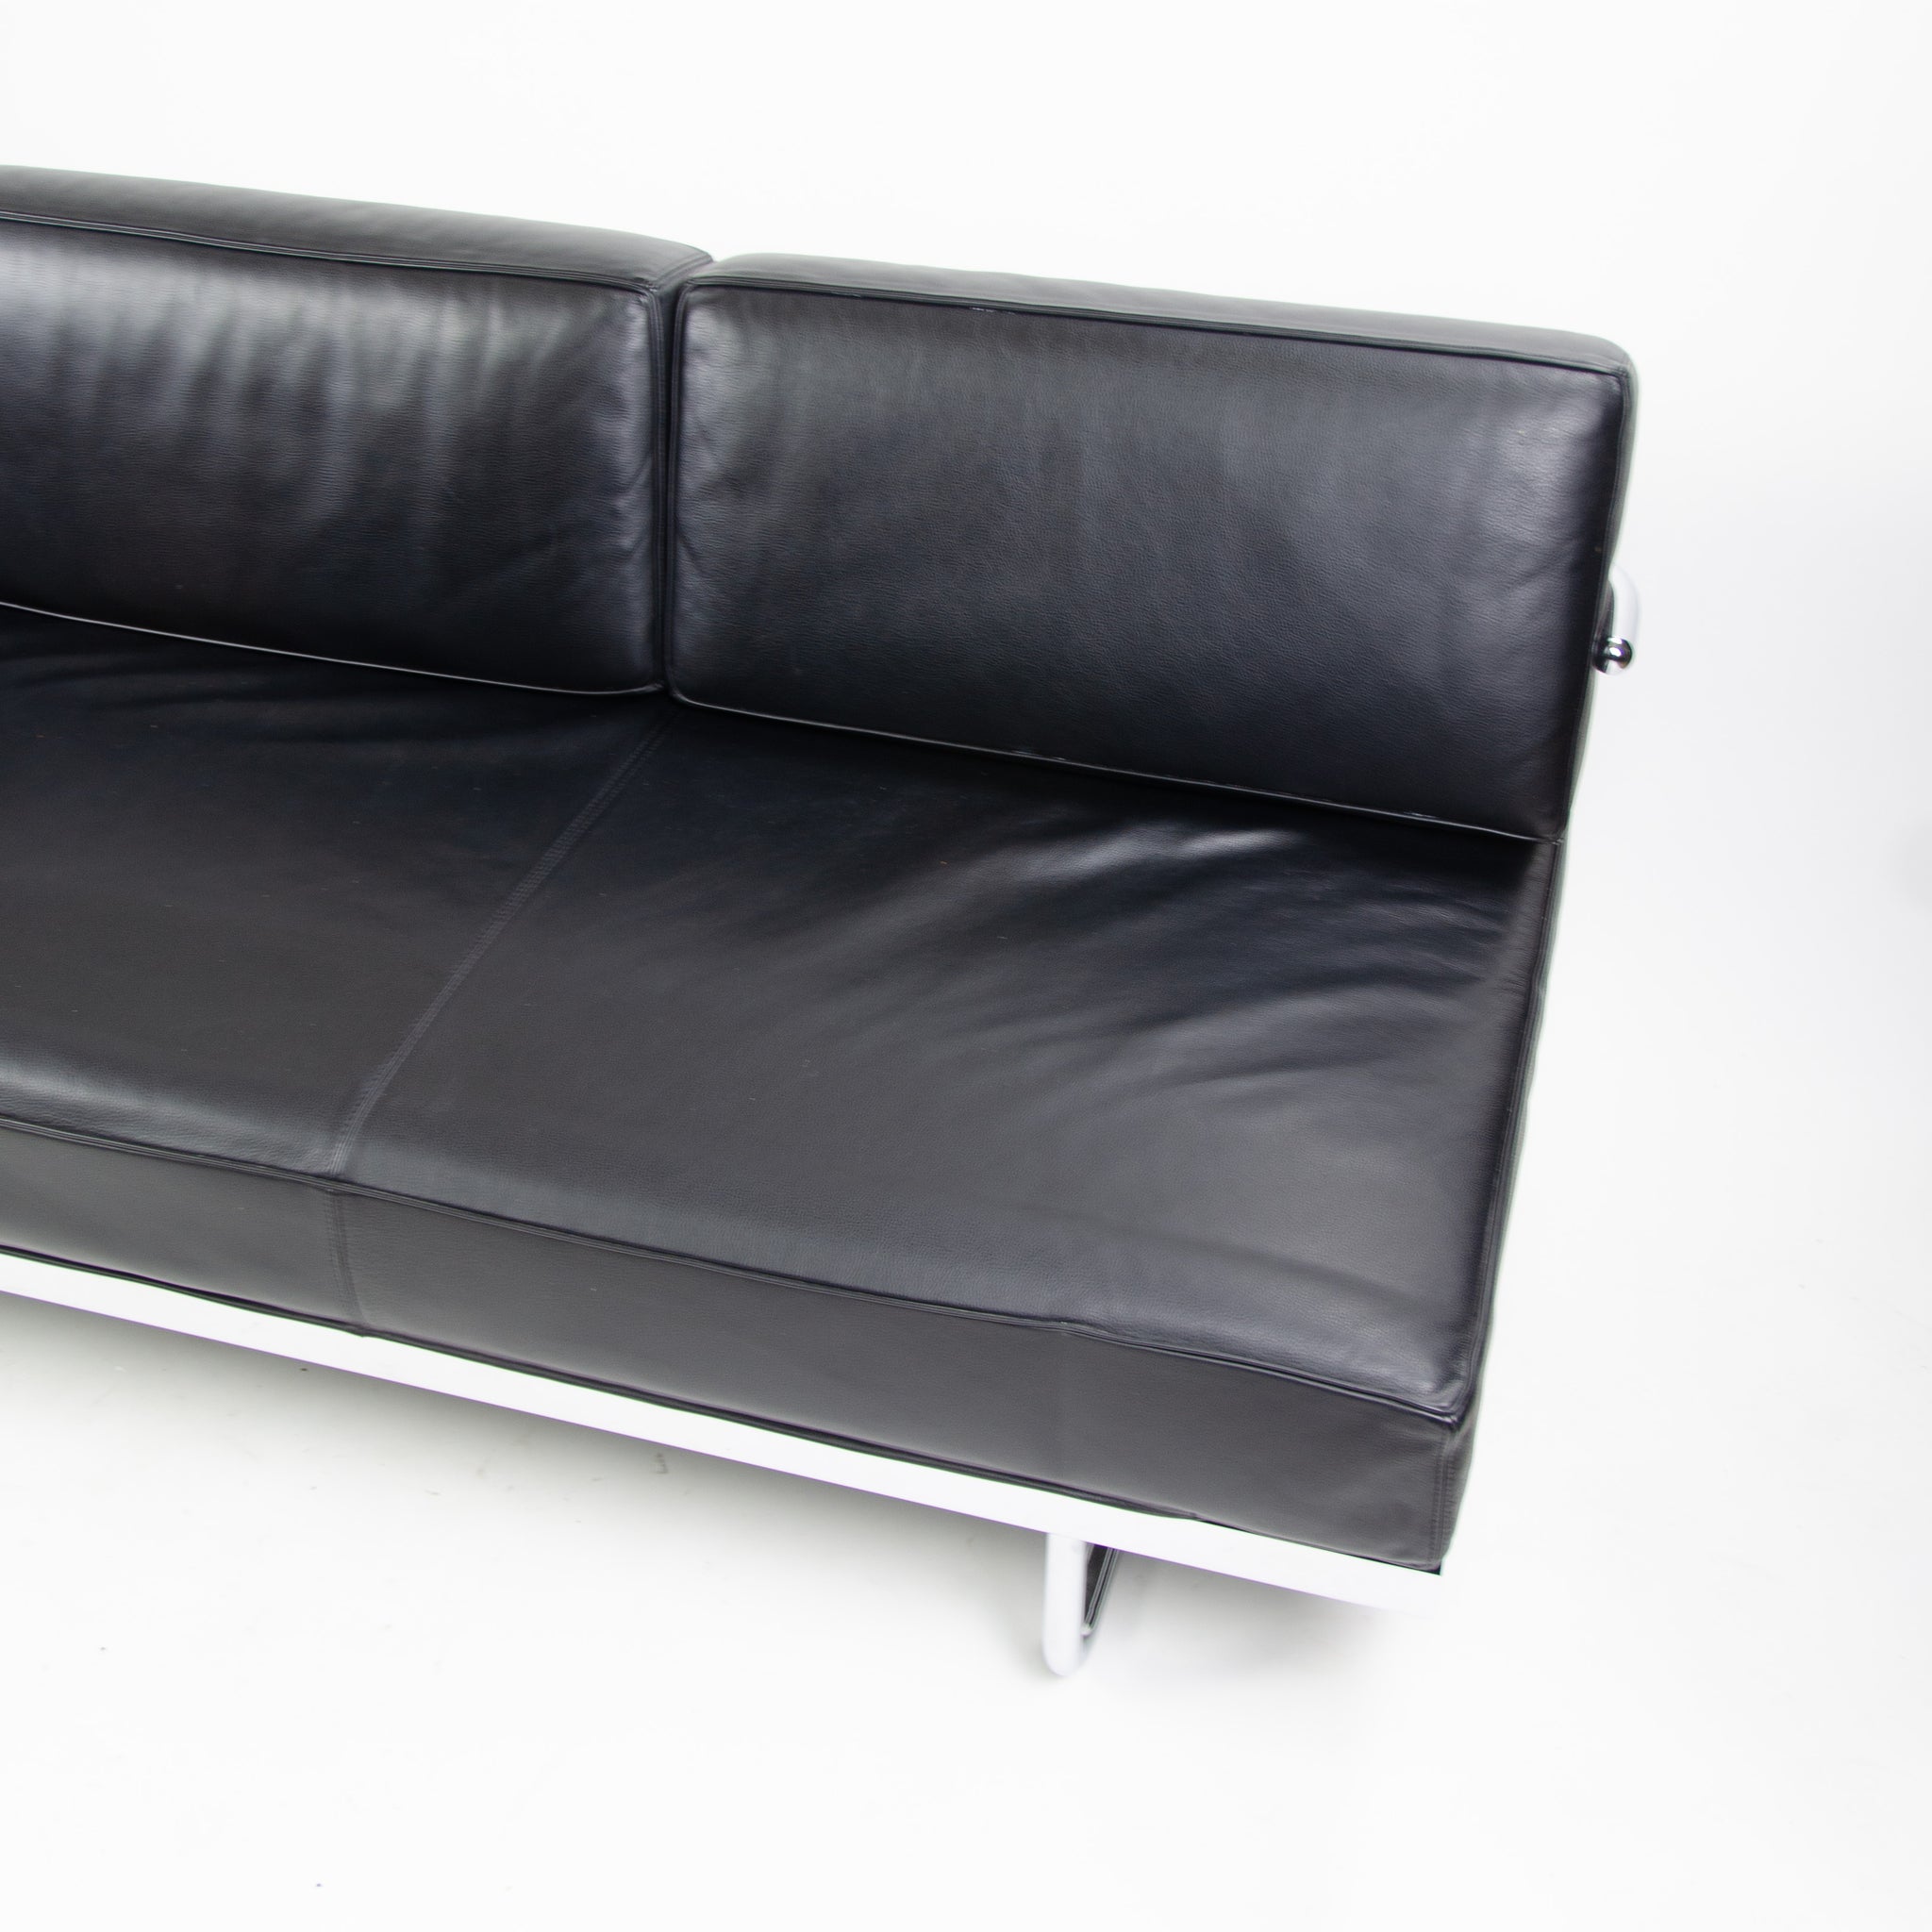 SOLD 2010 Cassina Italy Le Corbusier LC5 Three Seater Sofa Daybed Black Leather 1x Available